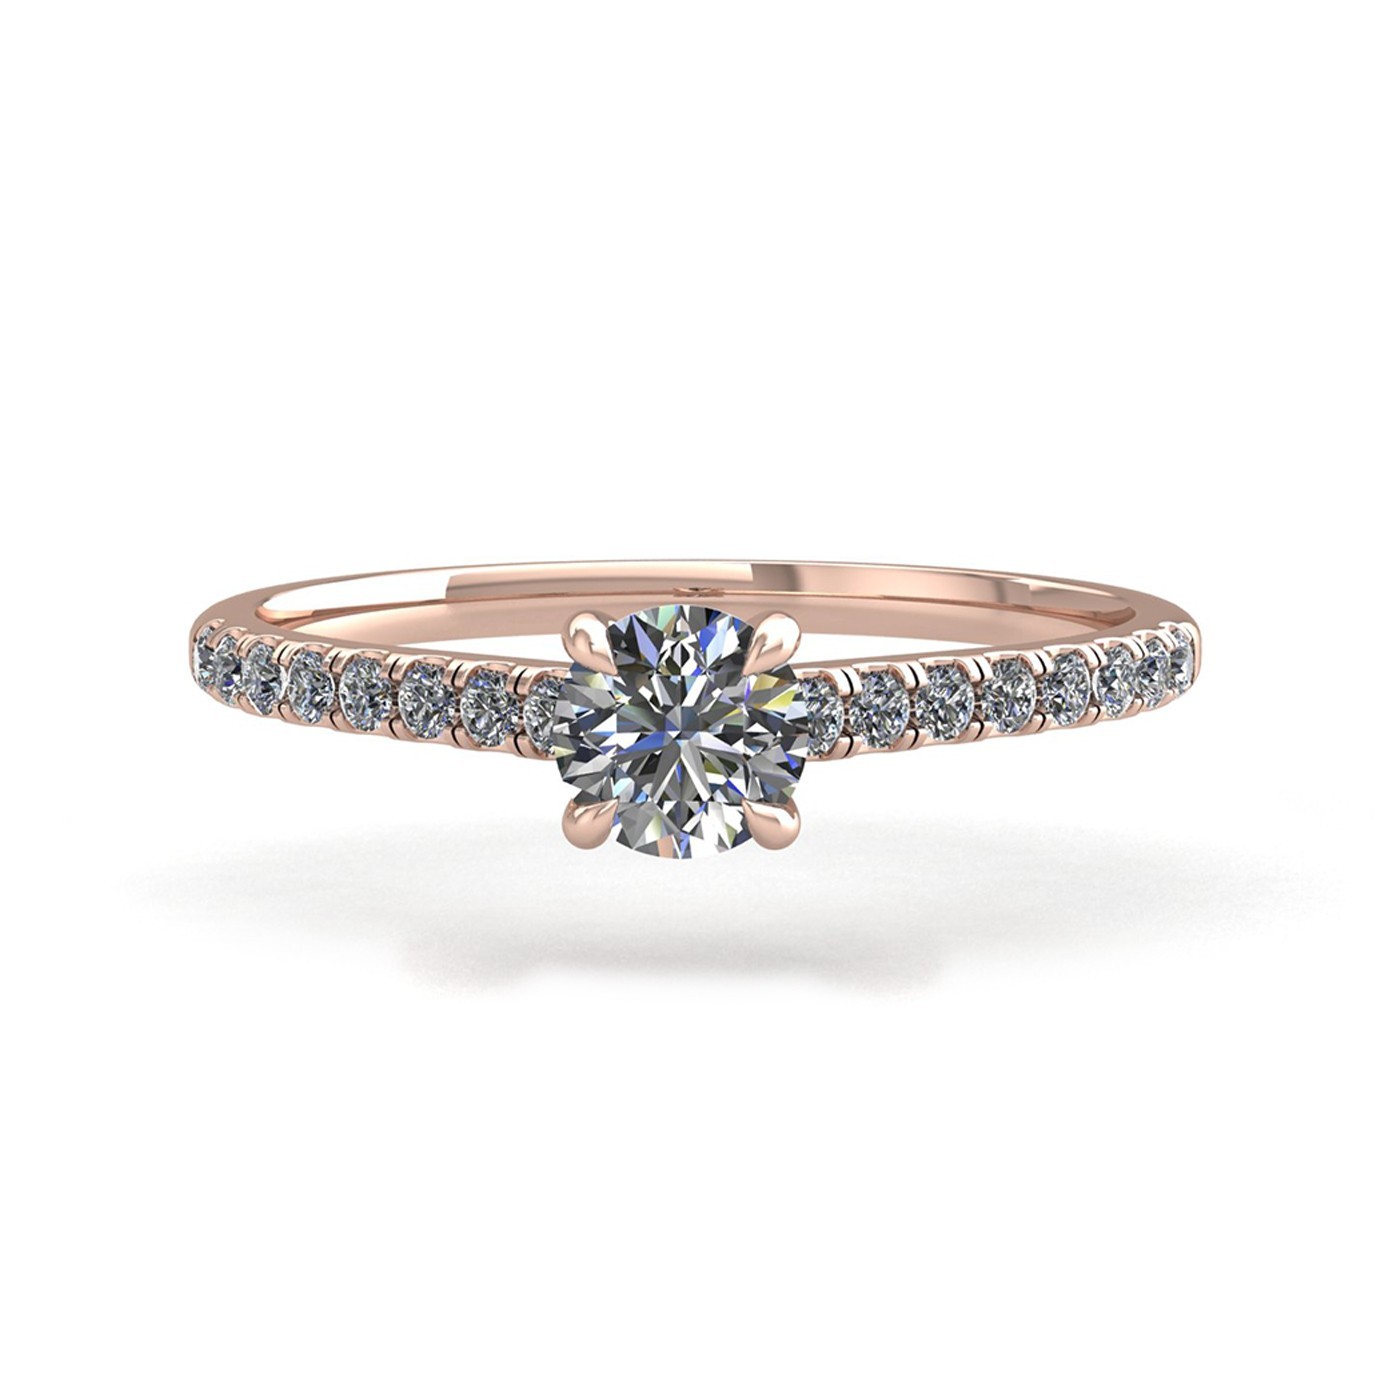 18k rose gold 2.5ct 4 prongs round cut diamond engagement ring with whisper thin pavÉ set band Photos & images